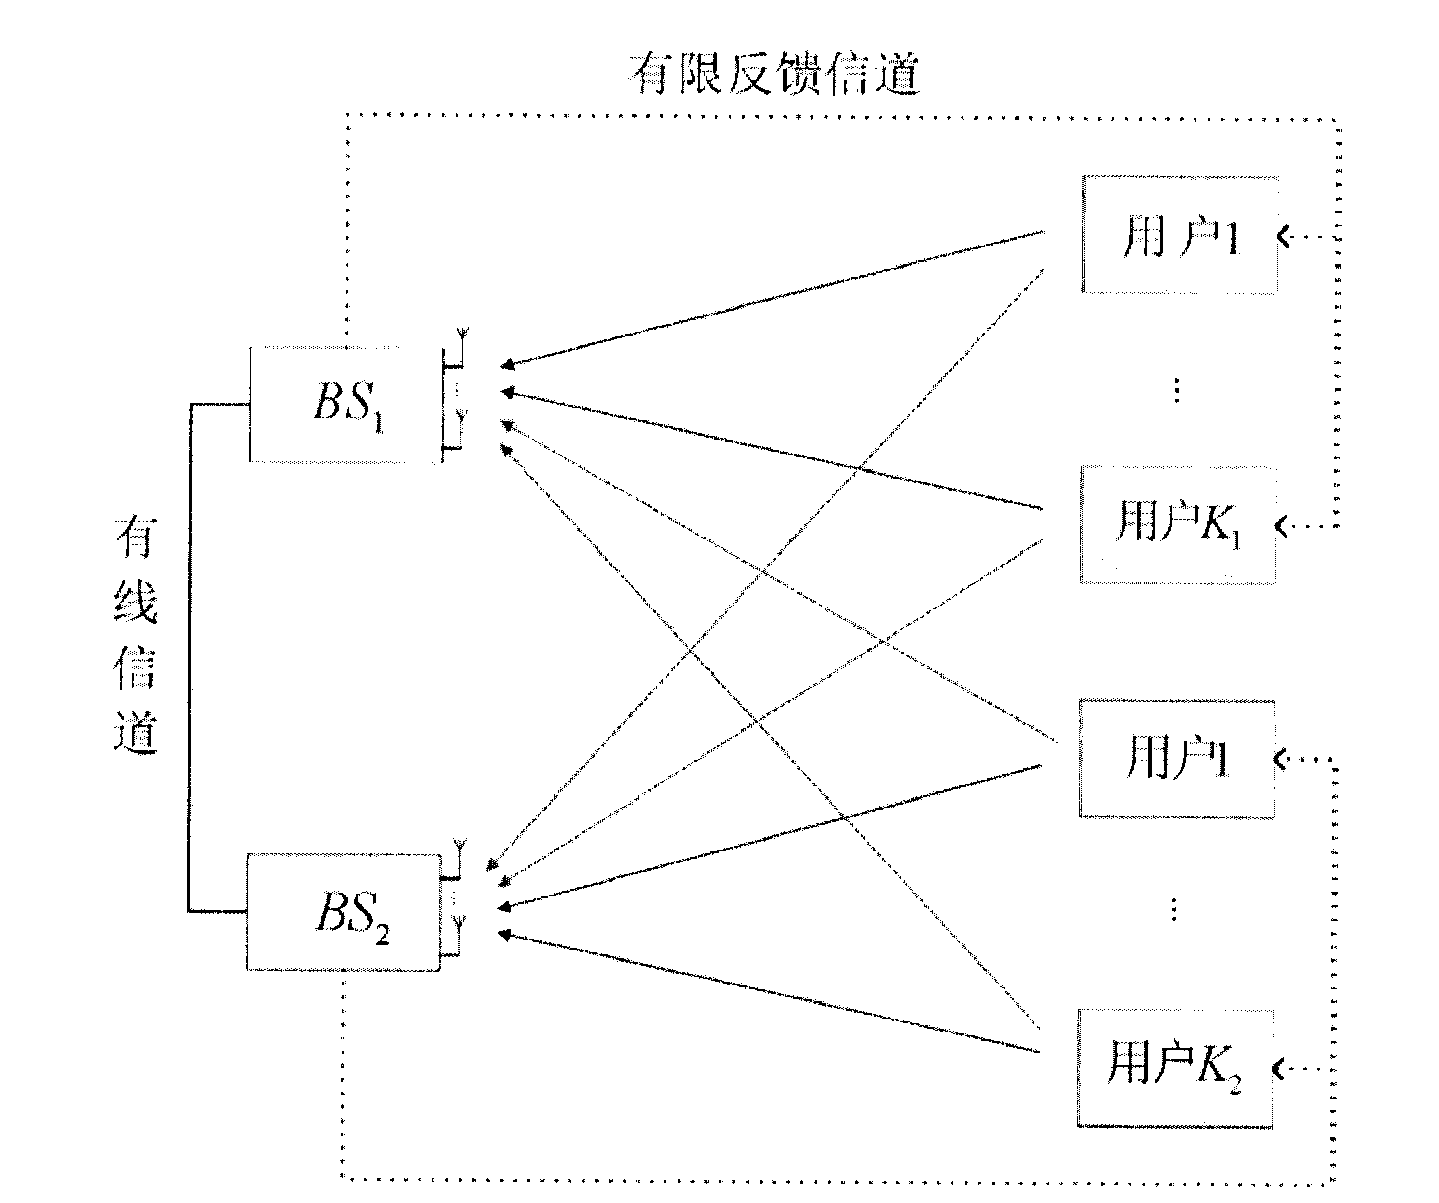 Interference alignment method of up cell